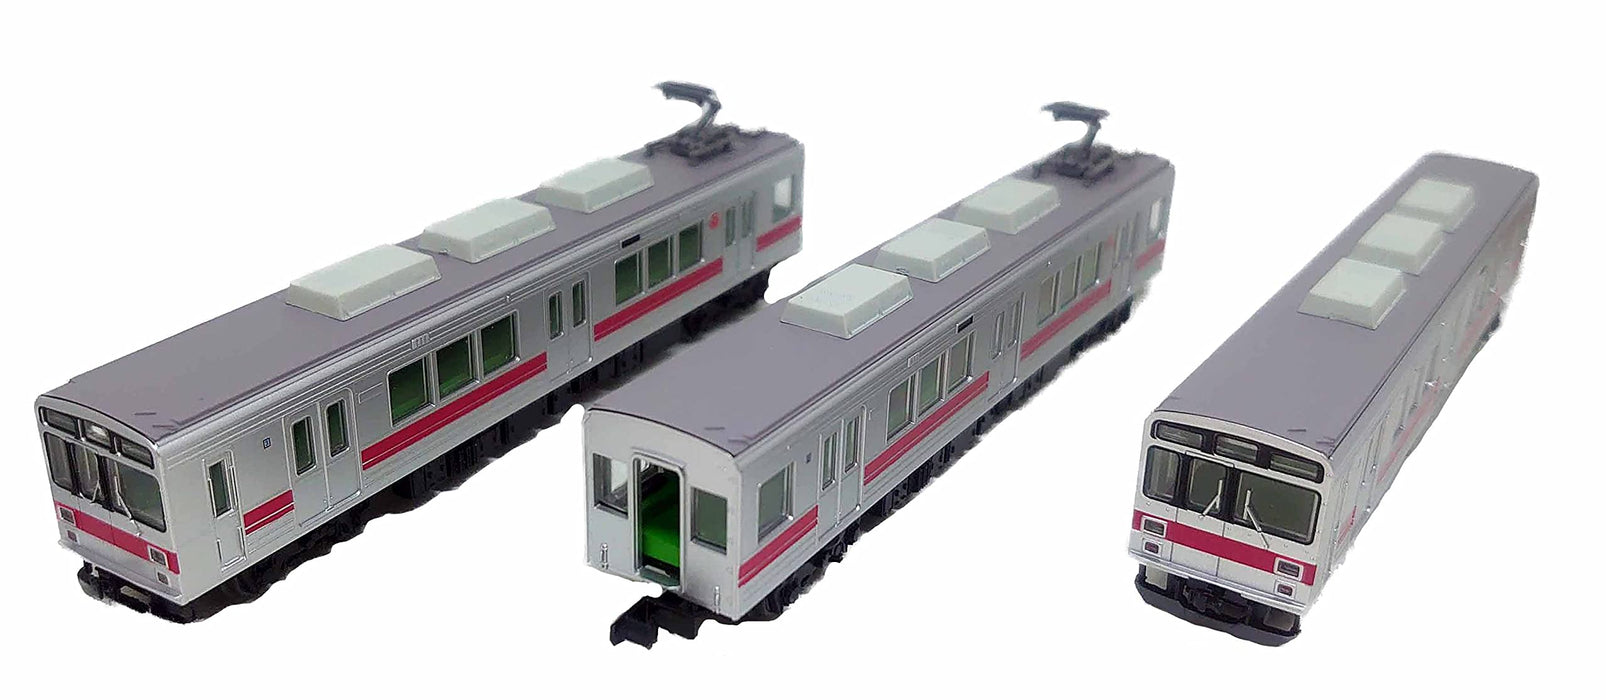 Tomytec Railway Collection 1000 Series 3-Car Set from Tokyu Corporation